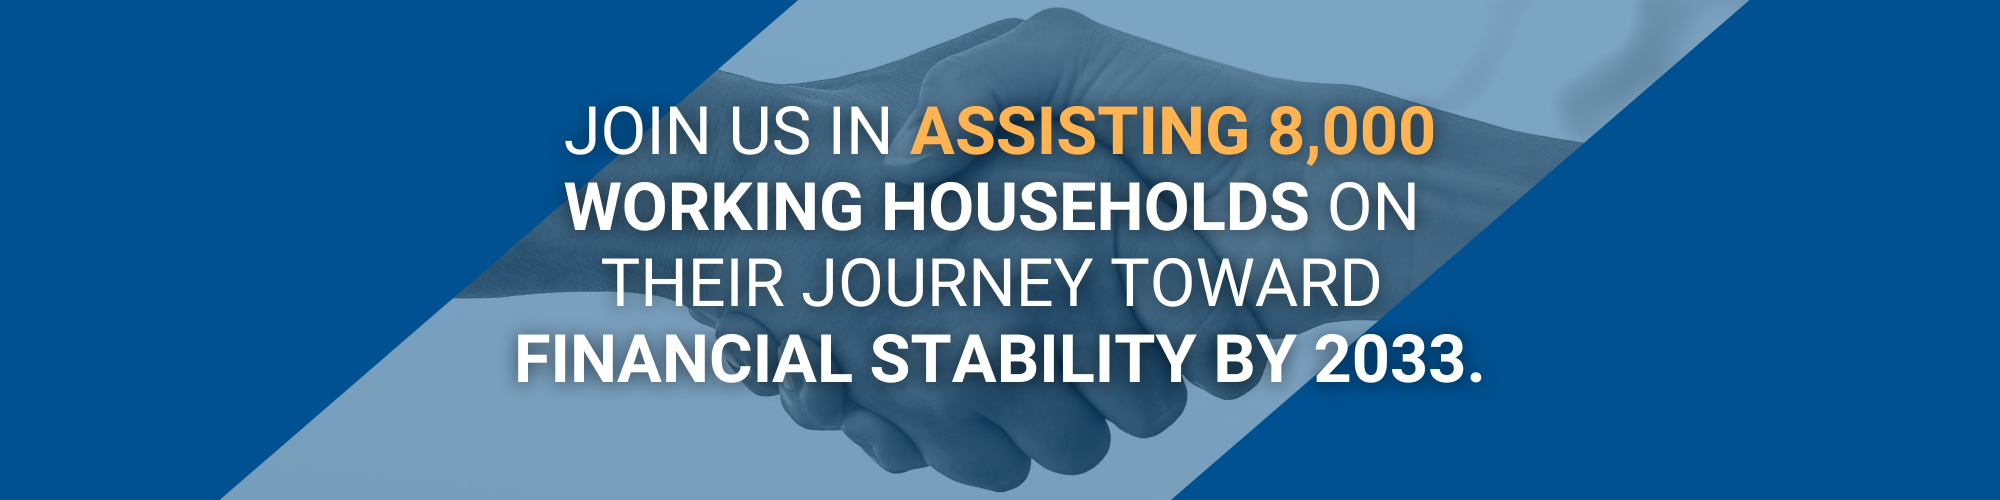 Join us in assisting 8,000 working households on their journey toward financial stability by 2033